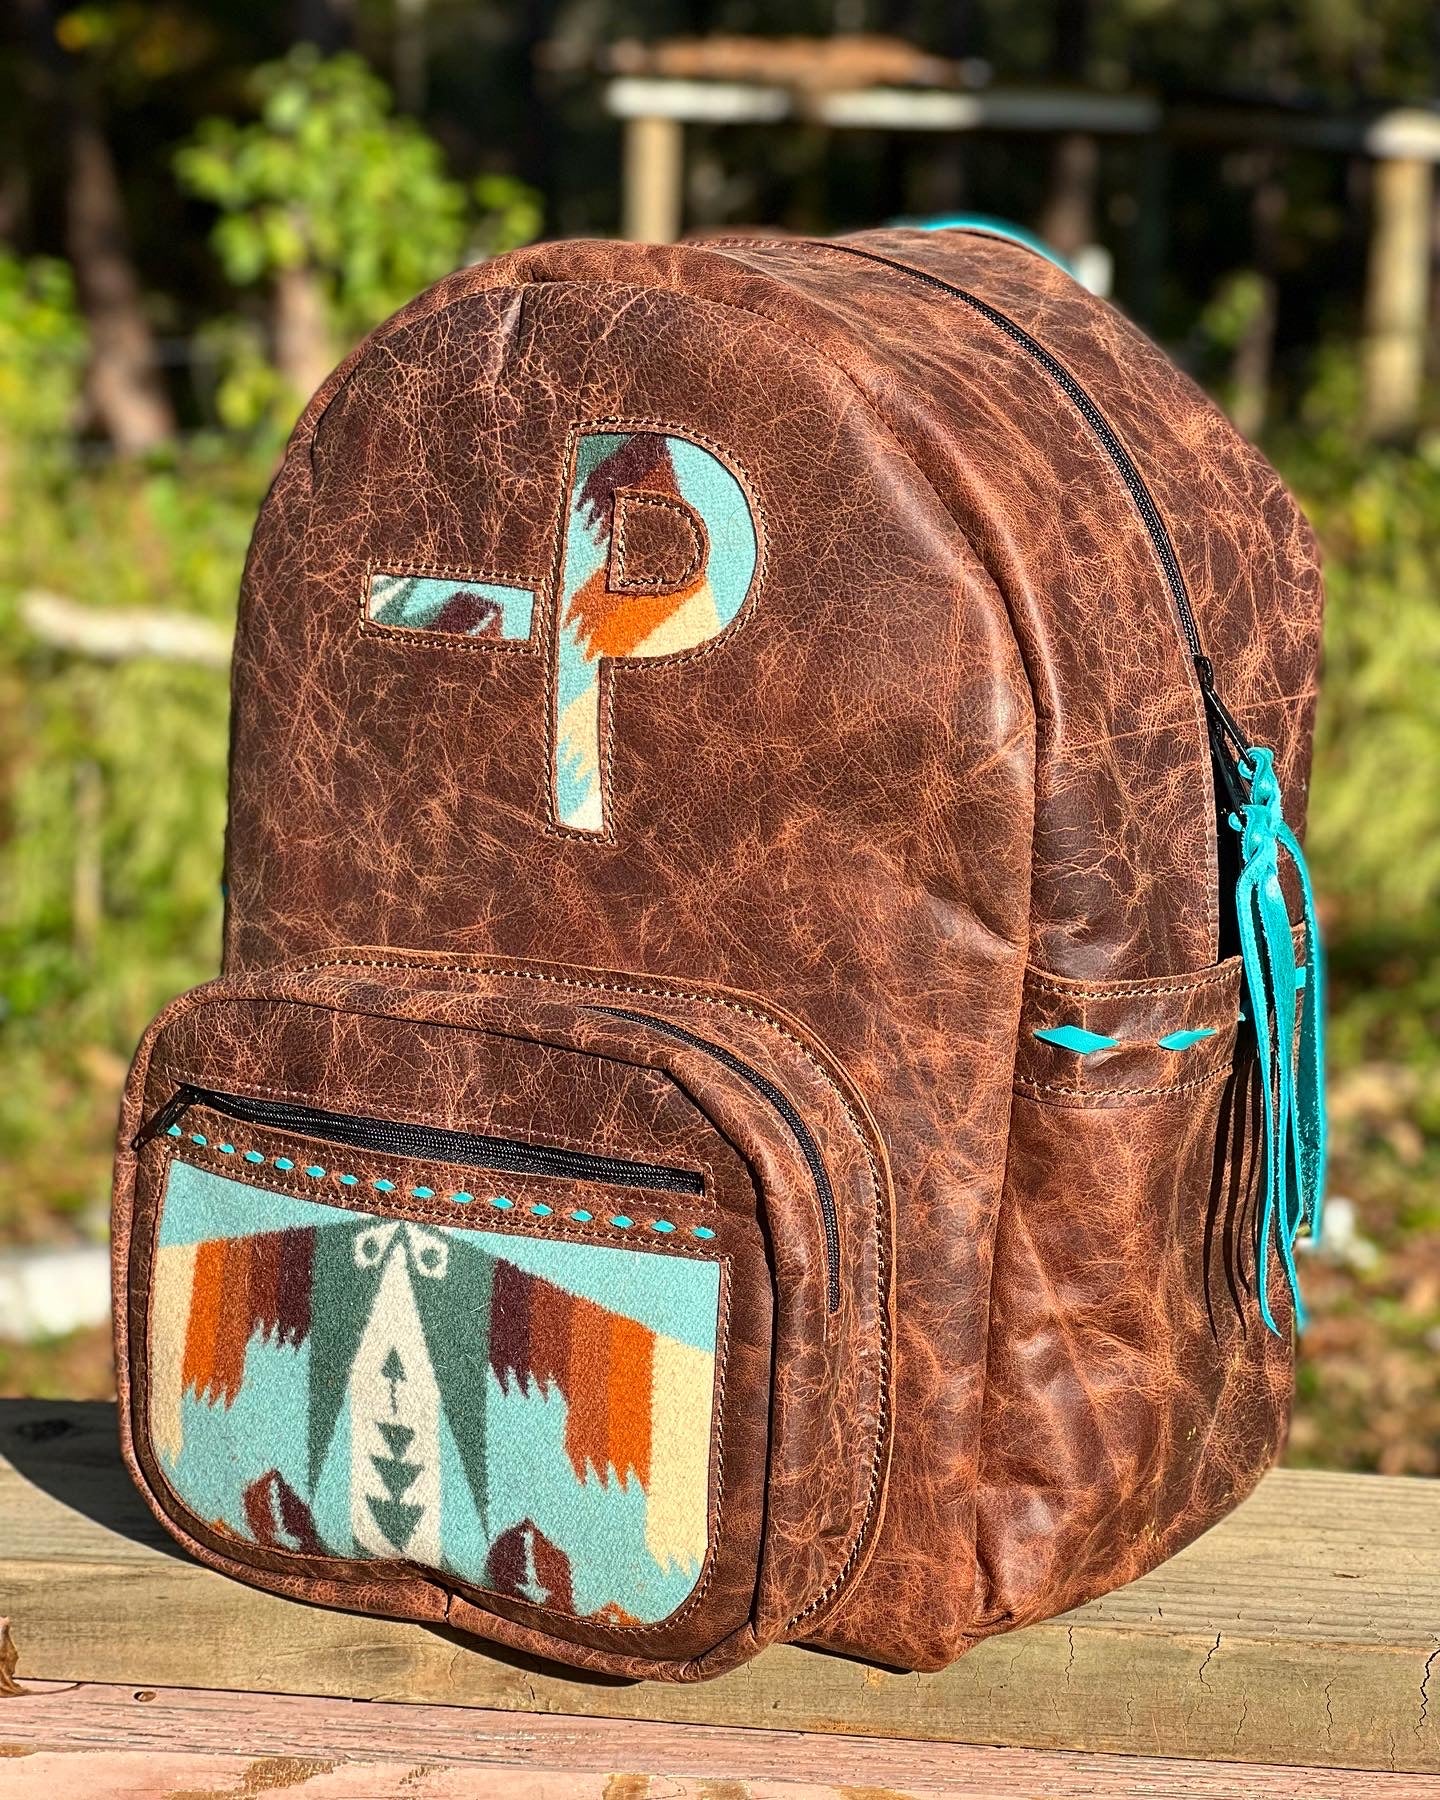 Brand/Initials/Design Inlaid (Backpack Add On)